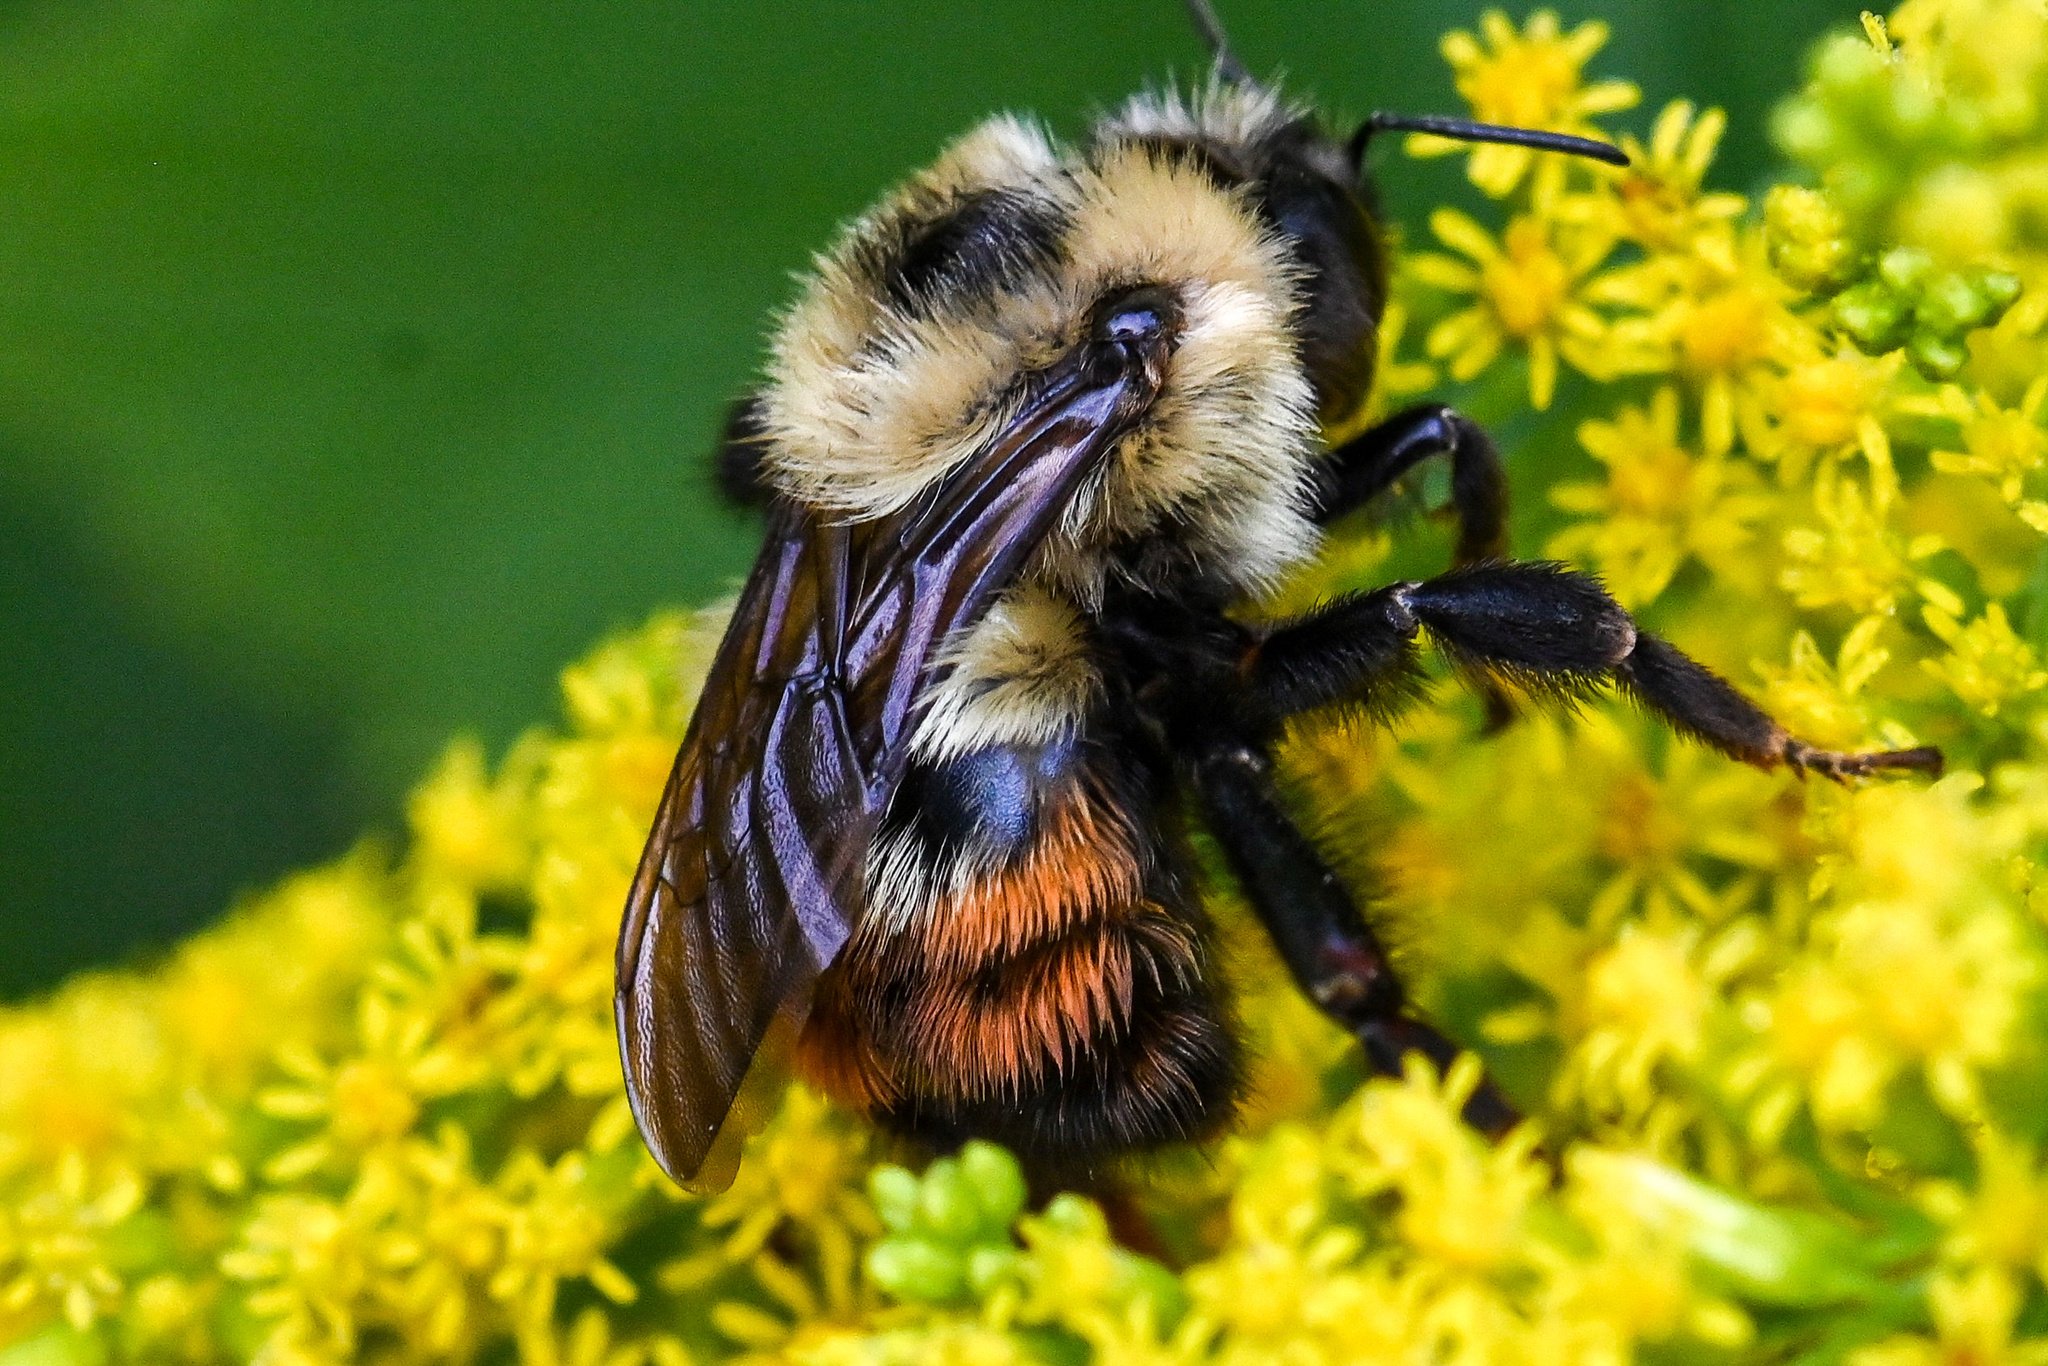 B rufocinctus, a/k/a The Red-belted Bumble Bee